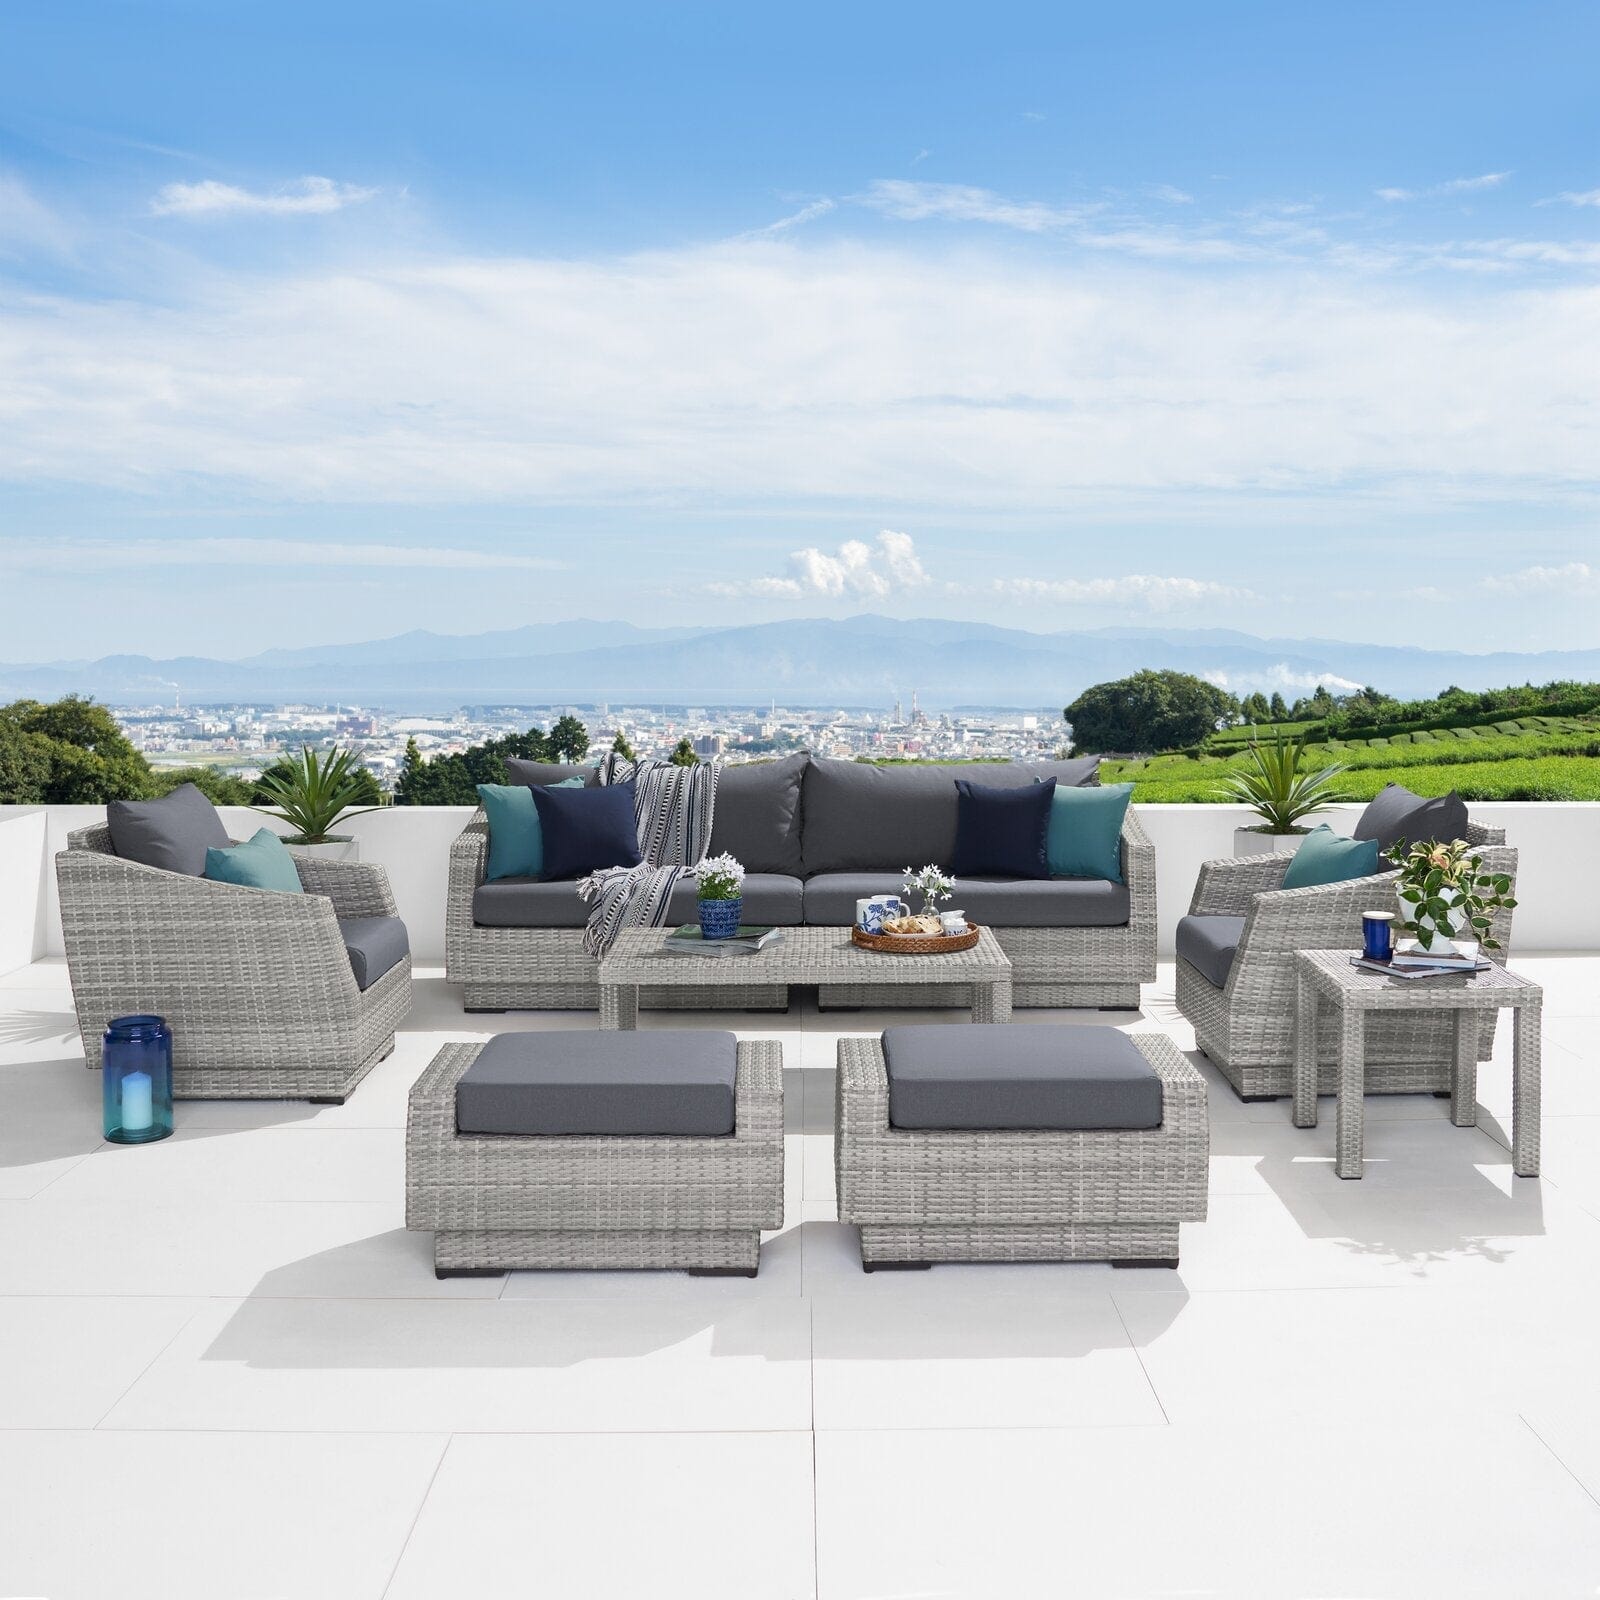 Dreamline Outdoor Garden Patio Sofa Set (3 Seater, 2 Single Seater , 2 Footstool , 1 Side Table And 1 Center Table Set)